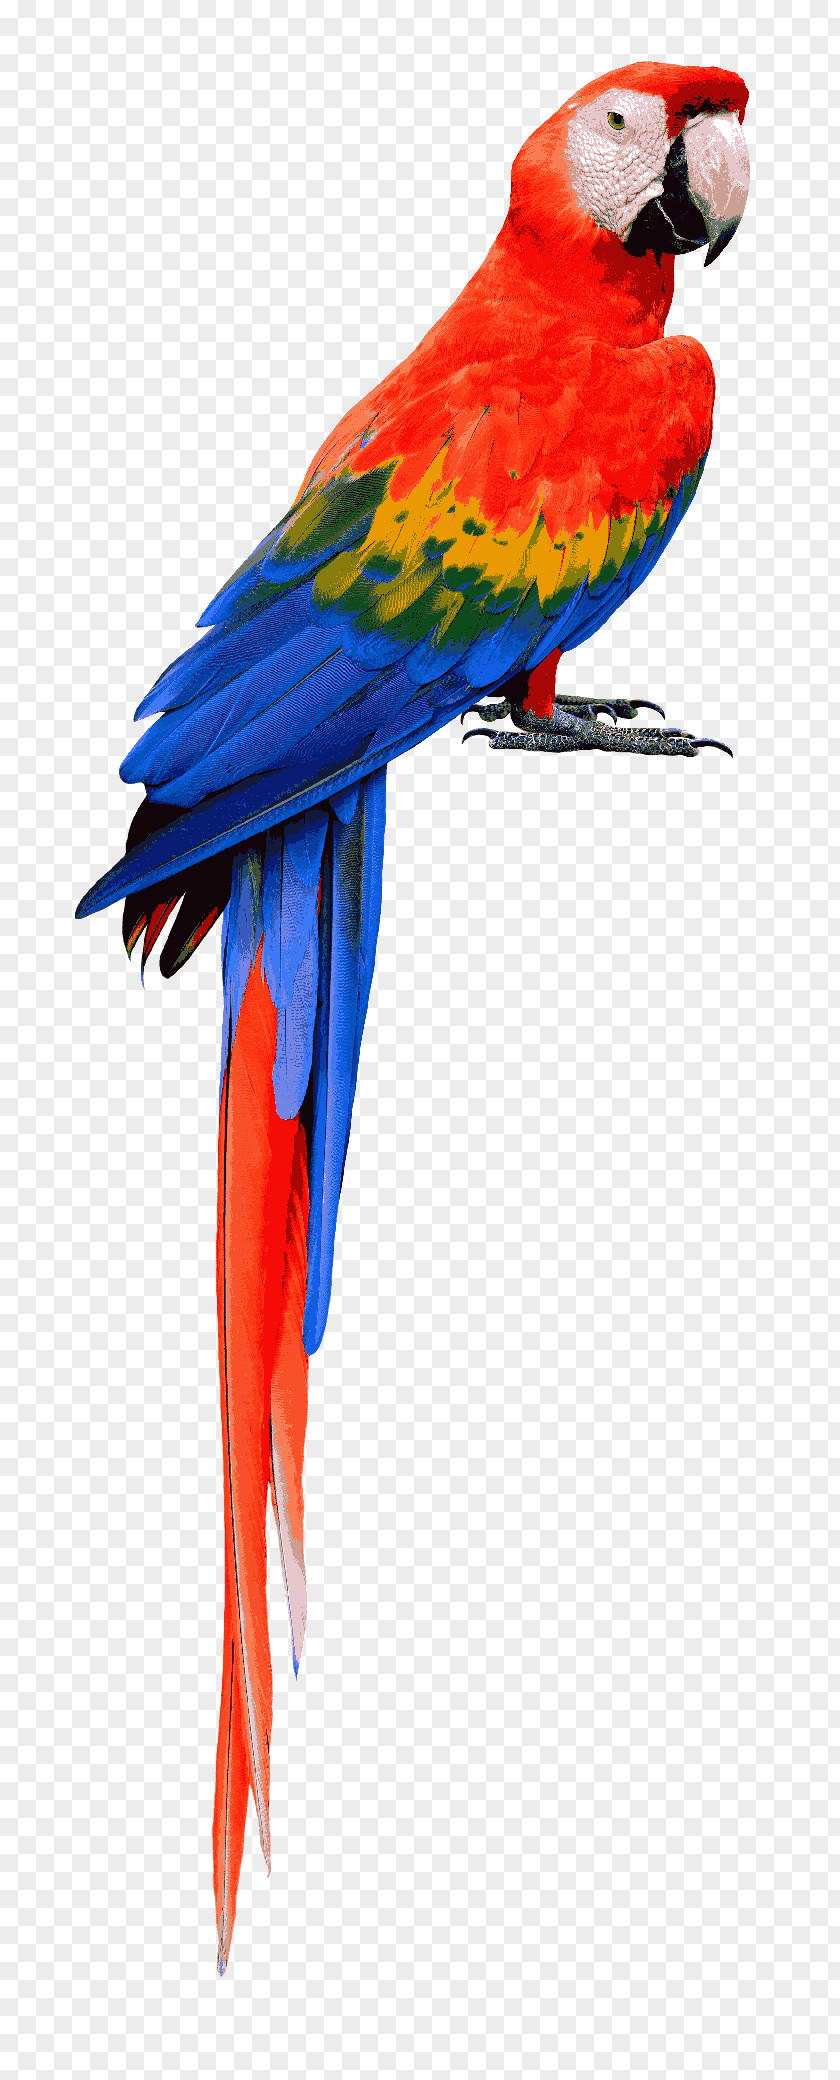 Parrot Bird Scarlet Macaw Blue-and-yellow PNG